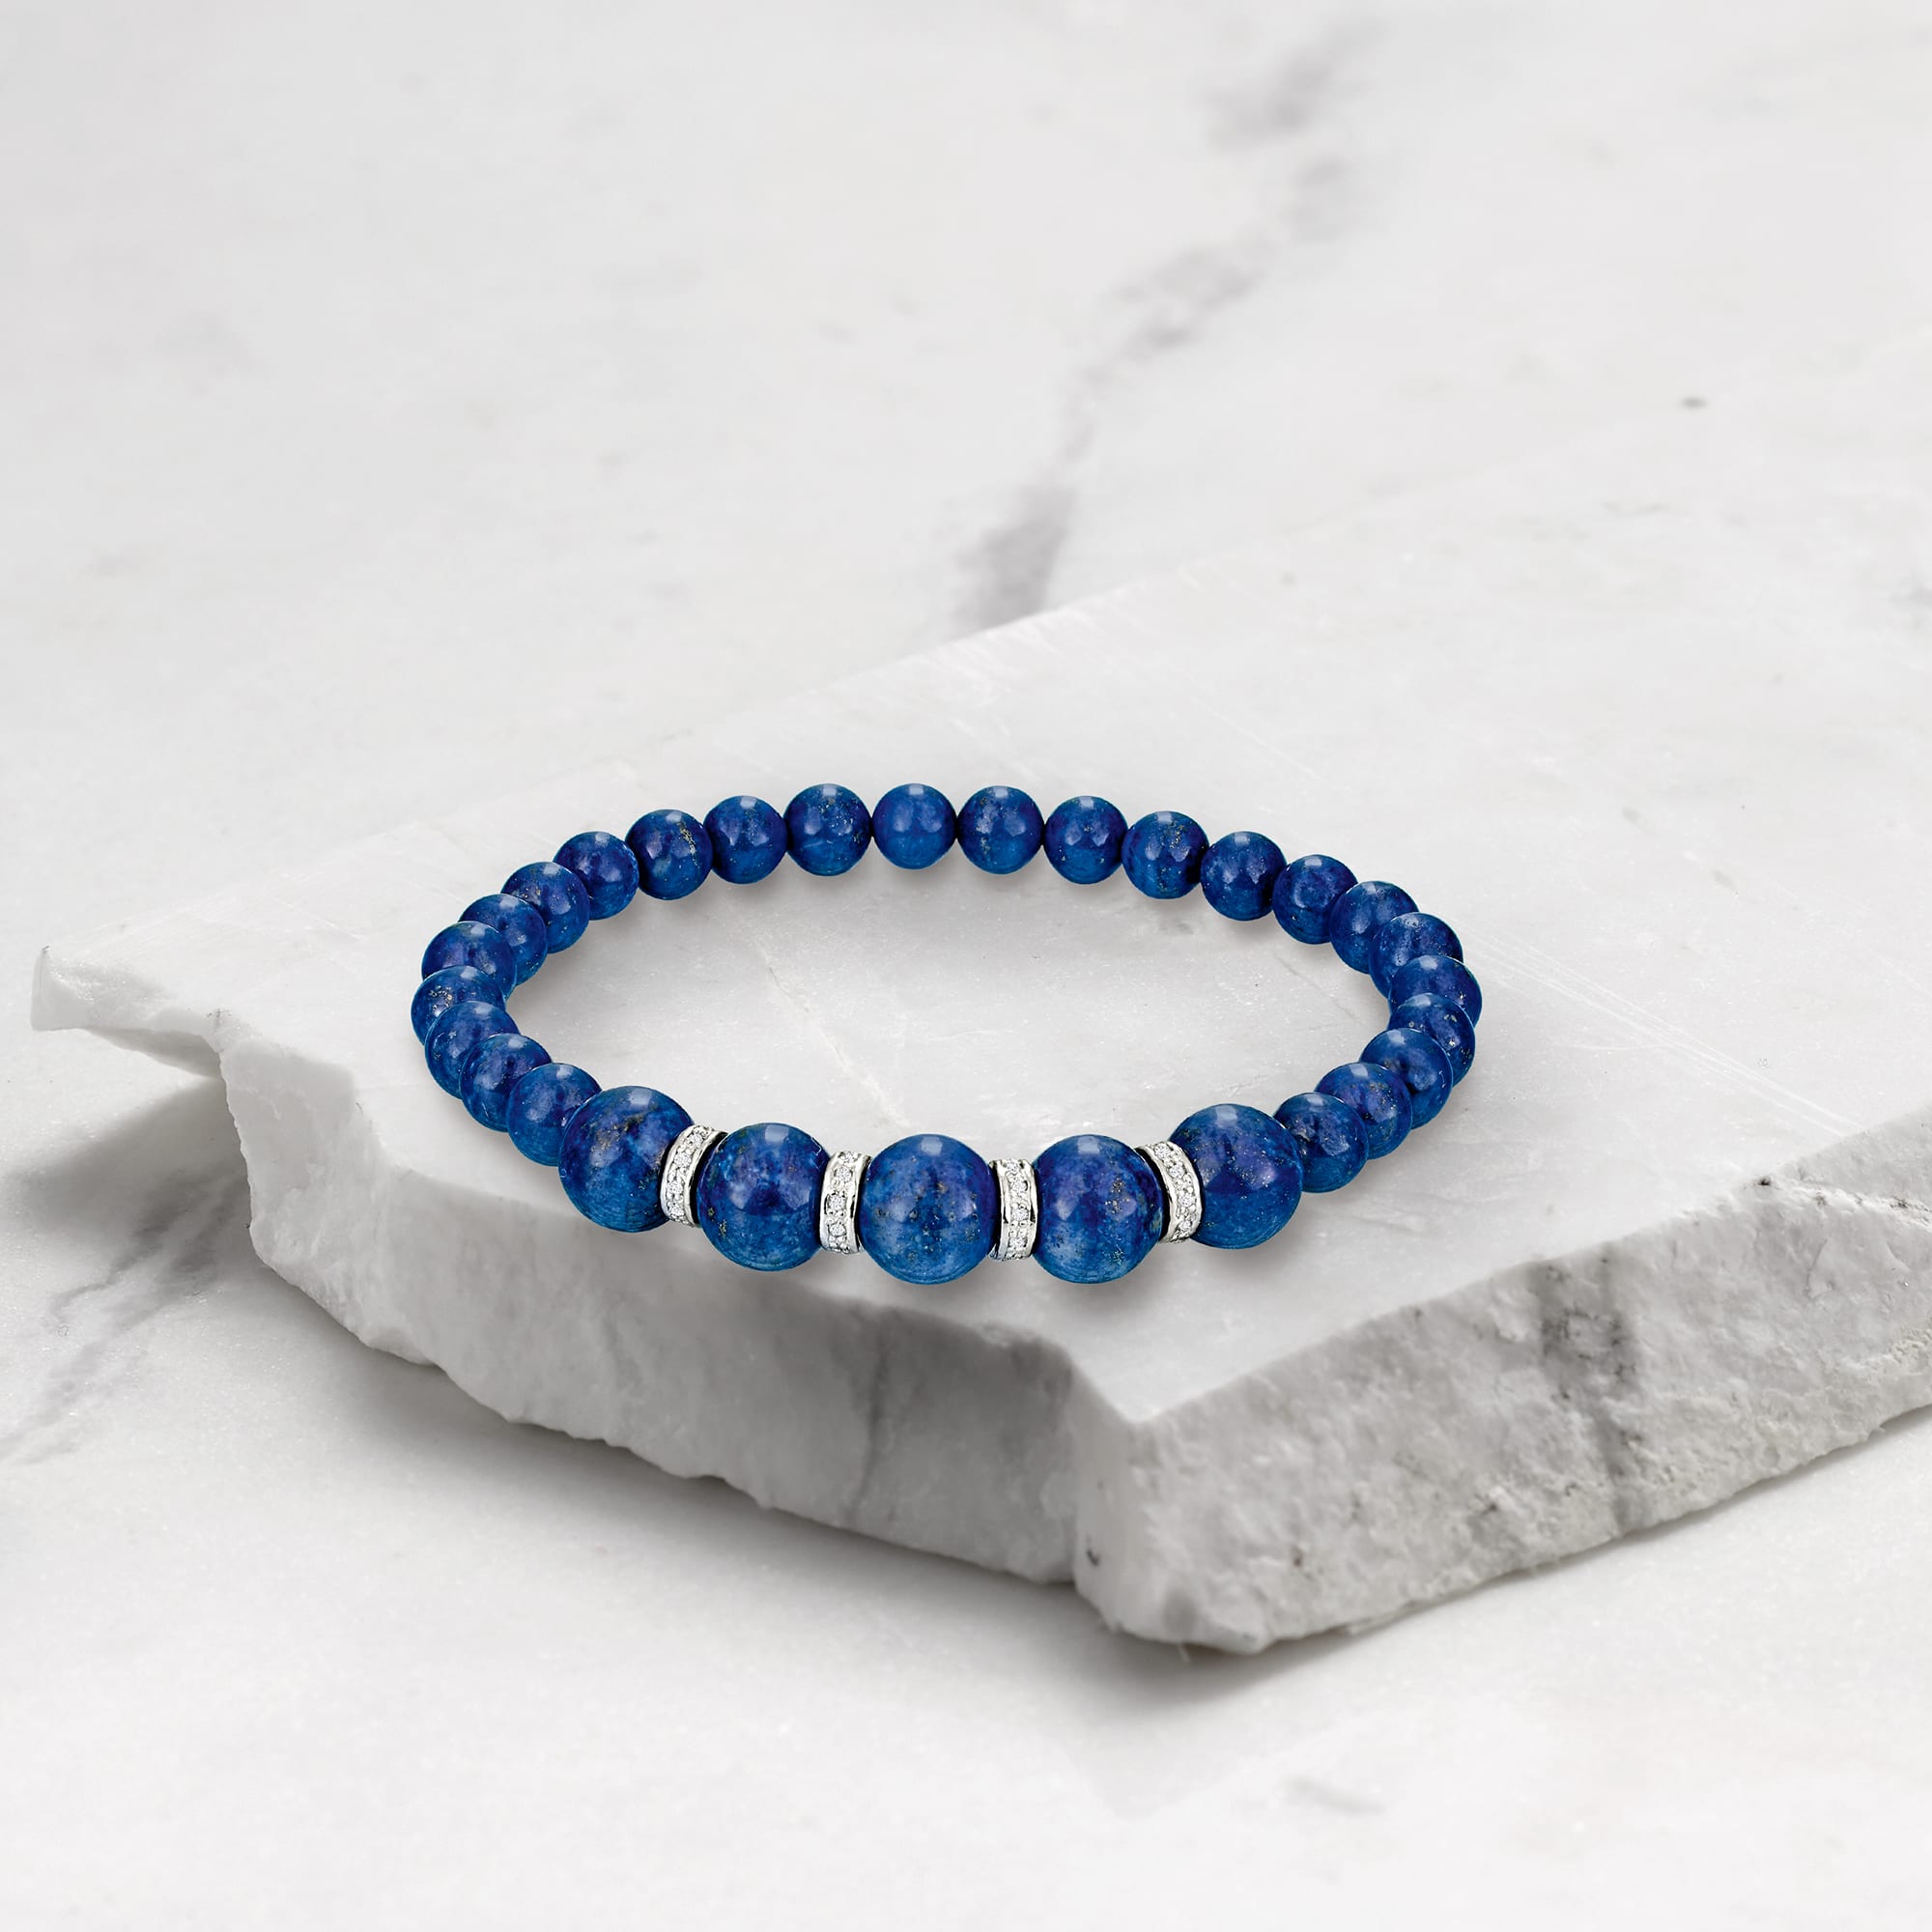 Bead | Diamond with and Bracelet Lapis Stretch .24 t.w. Silver ct. 6-8mm Ross-Simons Sterling